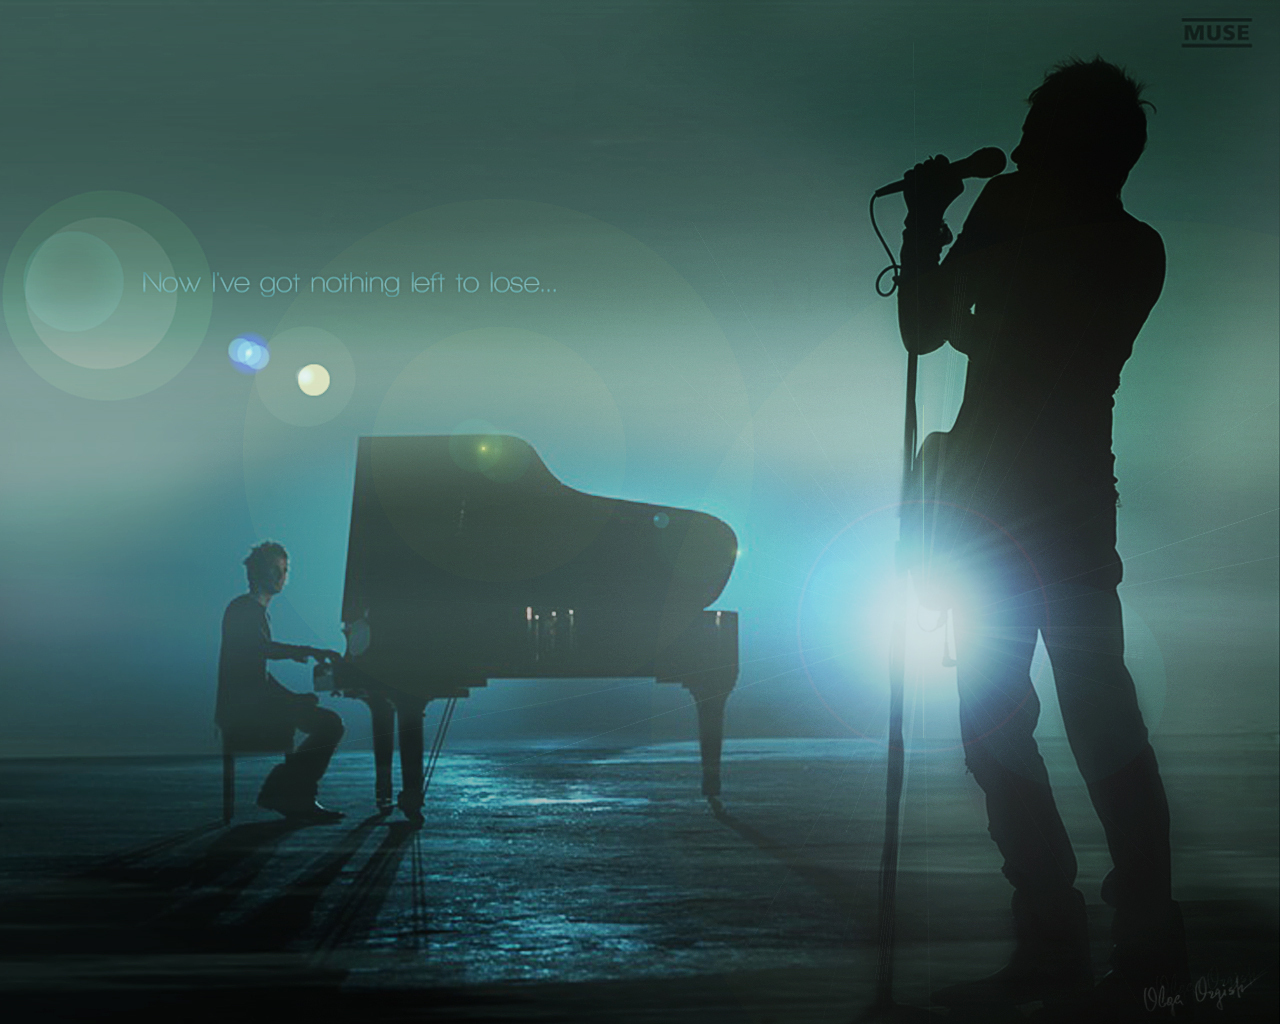 Neutron Star Collision Love Is Forever Wallpaper Muse Photo